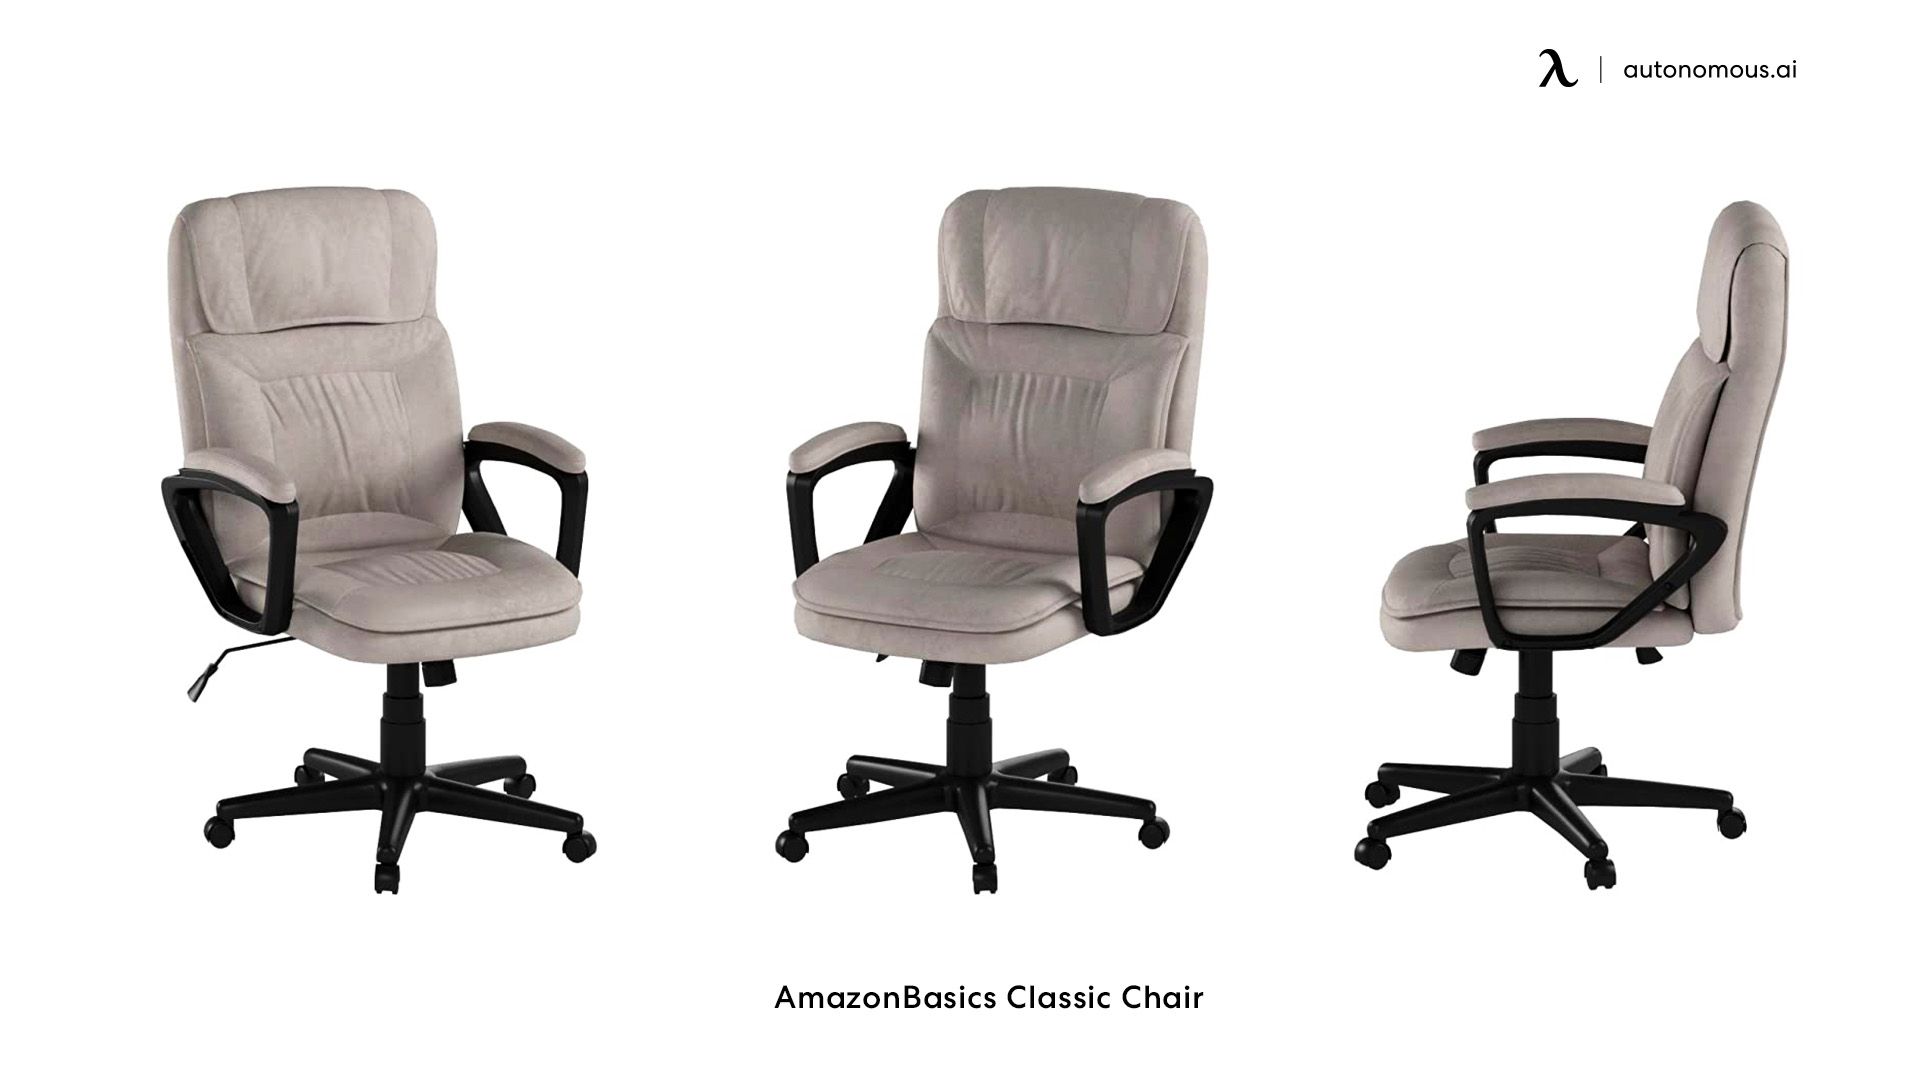 AmazonBasics Classic white and grey office chair